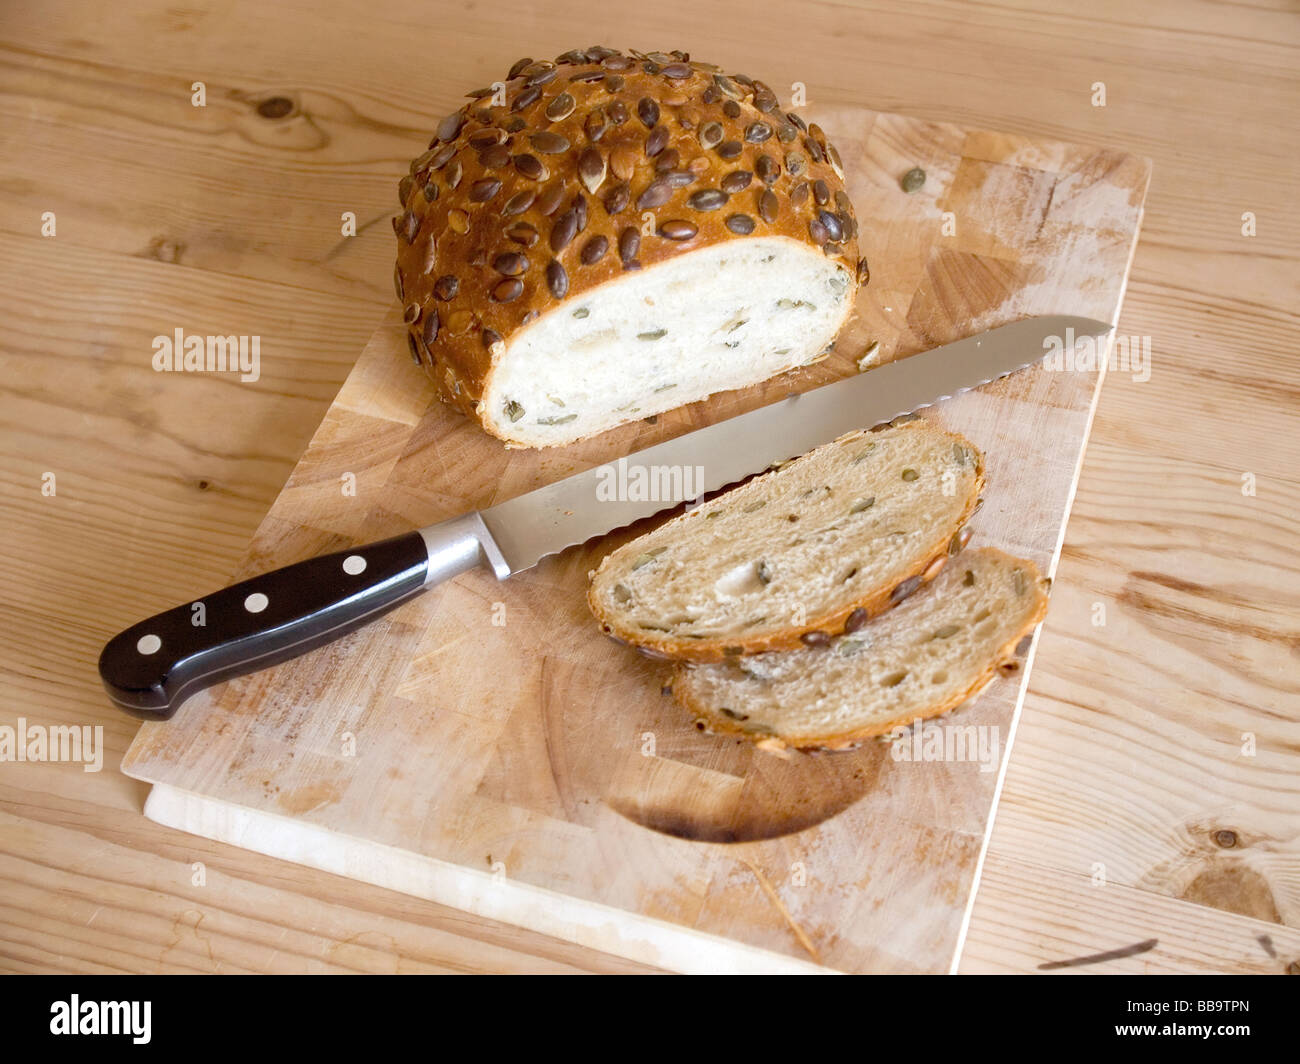 A newly sliced loaf of stone baked pumpkin seed loaf with a bread knife on a wooden board Stock Photo